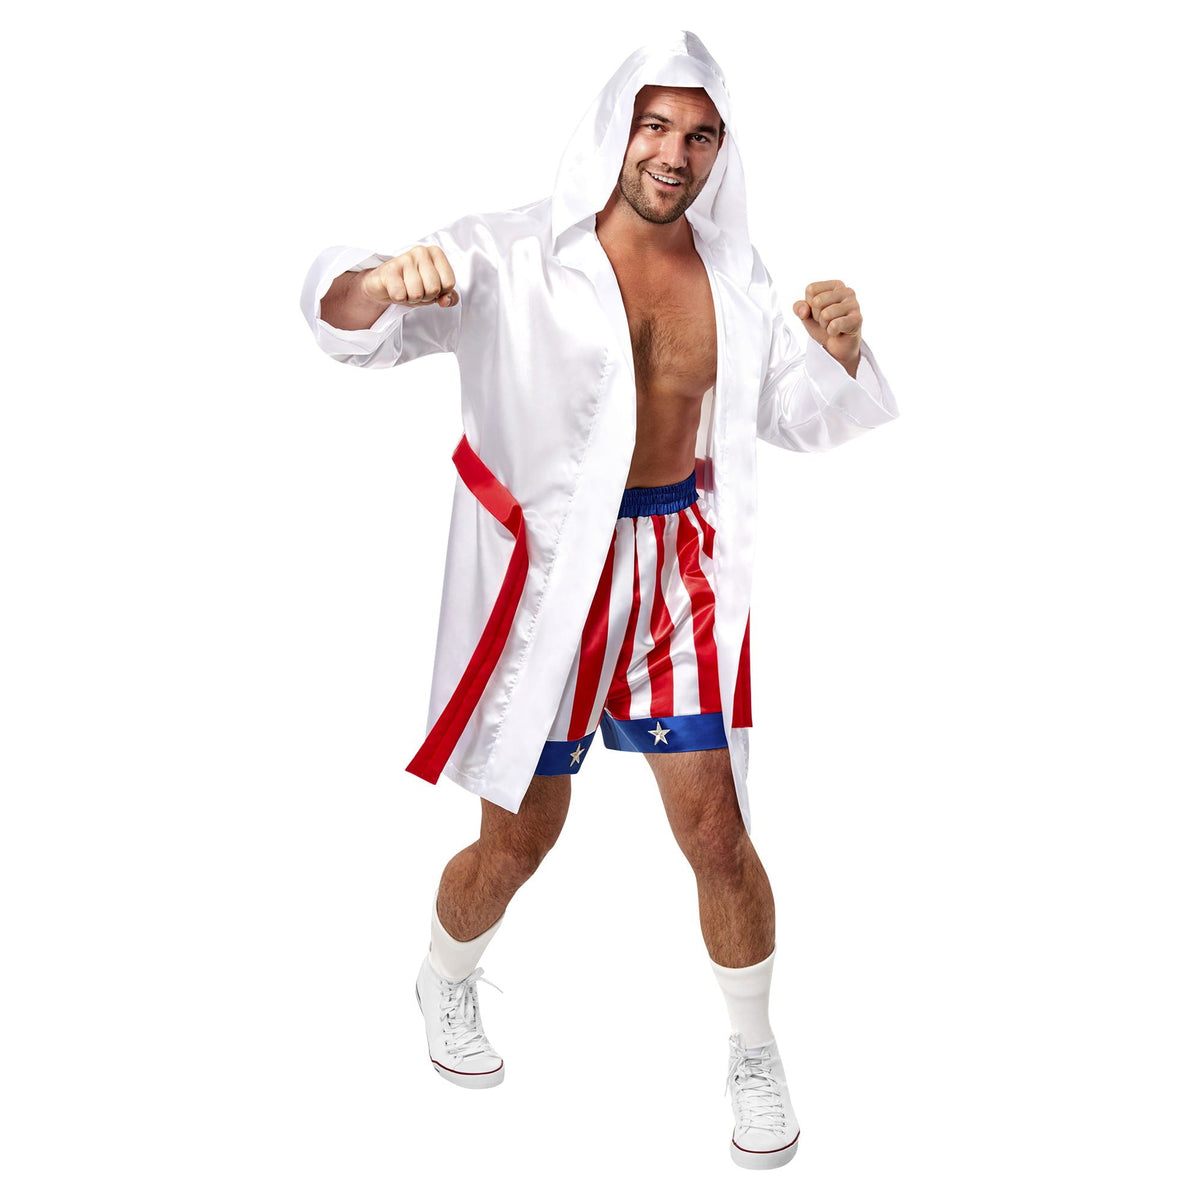 RUBIES II (Ruby Slipper Sales) Costumes Rocky Balboa Costume for Adults, White Robe with Sash and Shorts